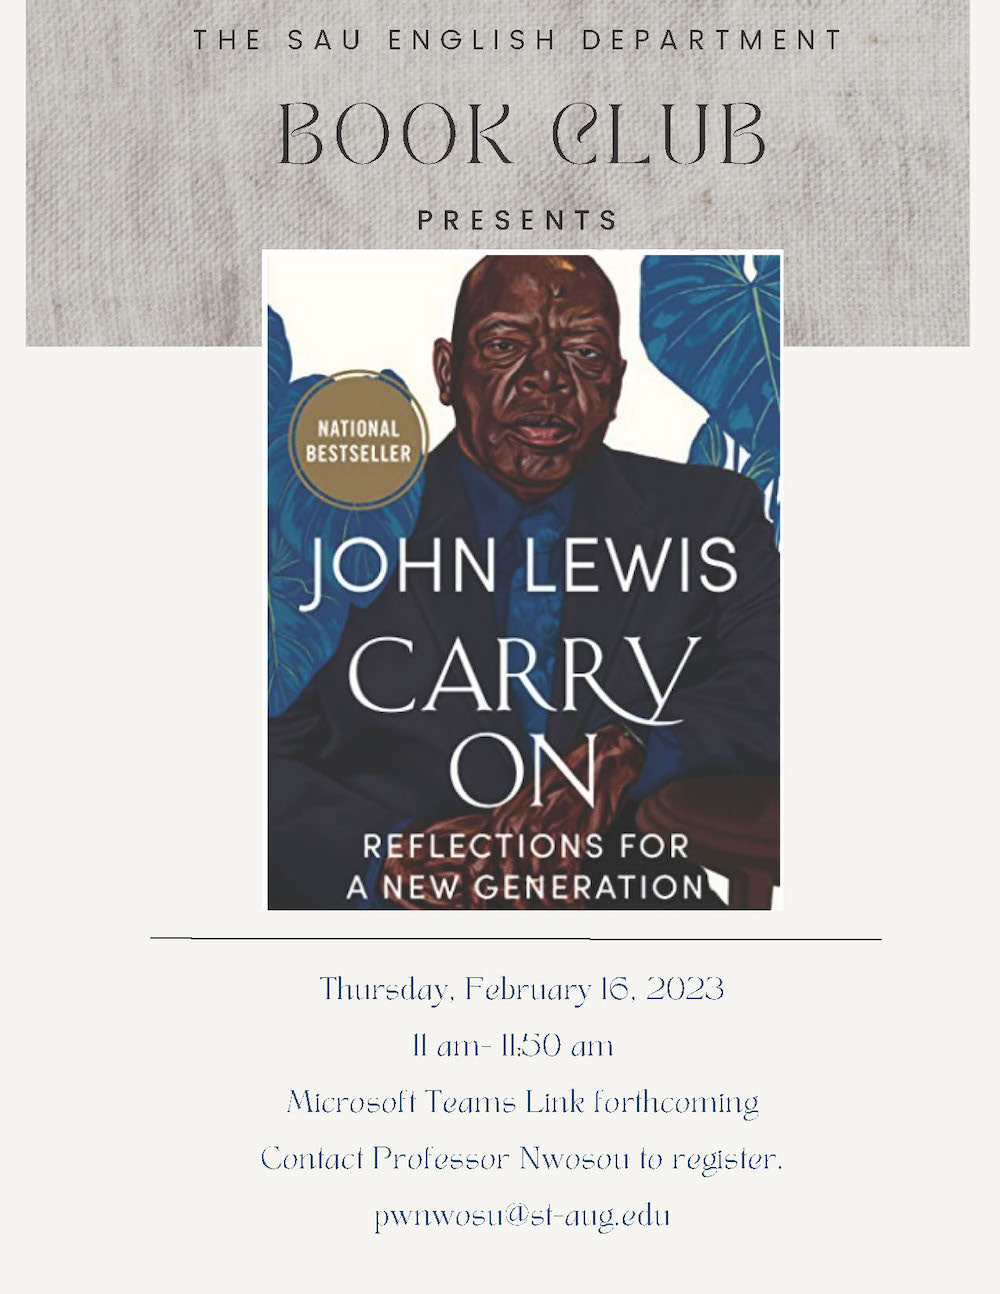 Carry on: Reflections for a New Generation [Book]